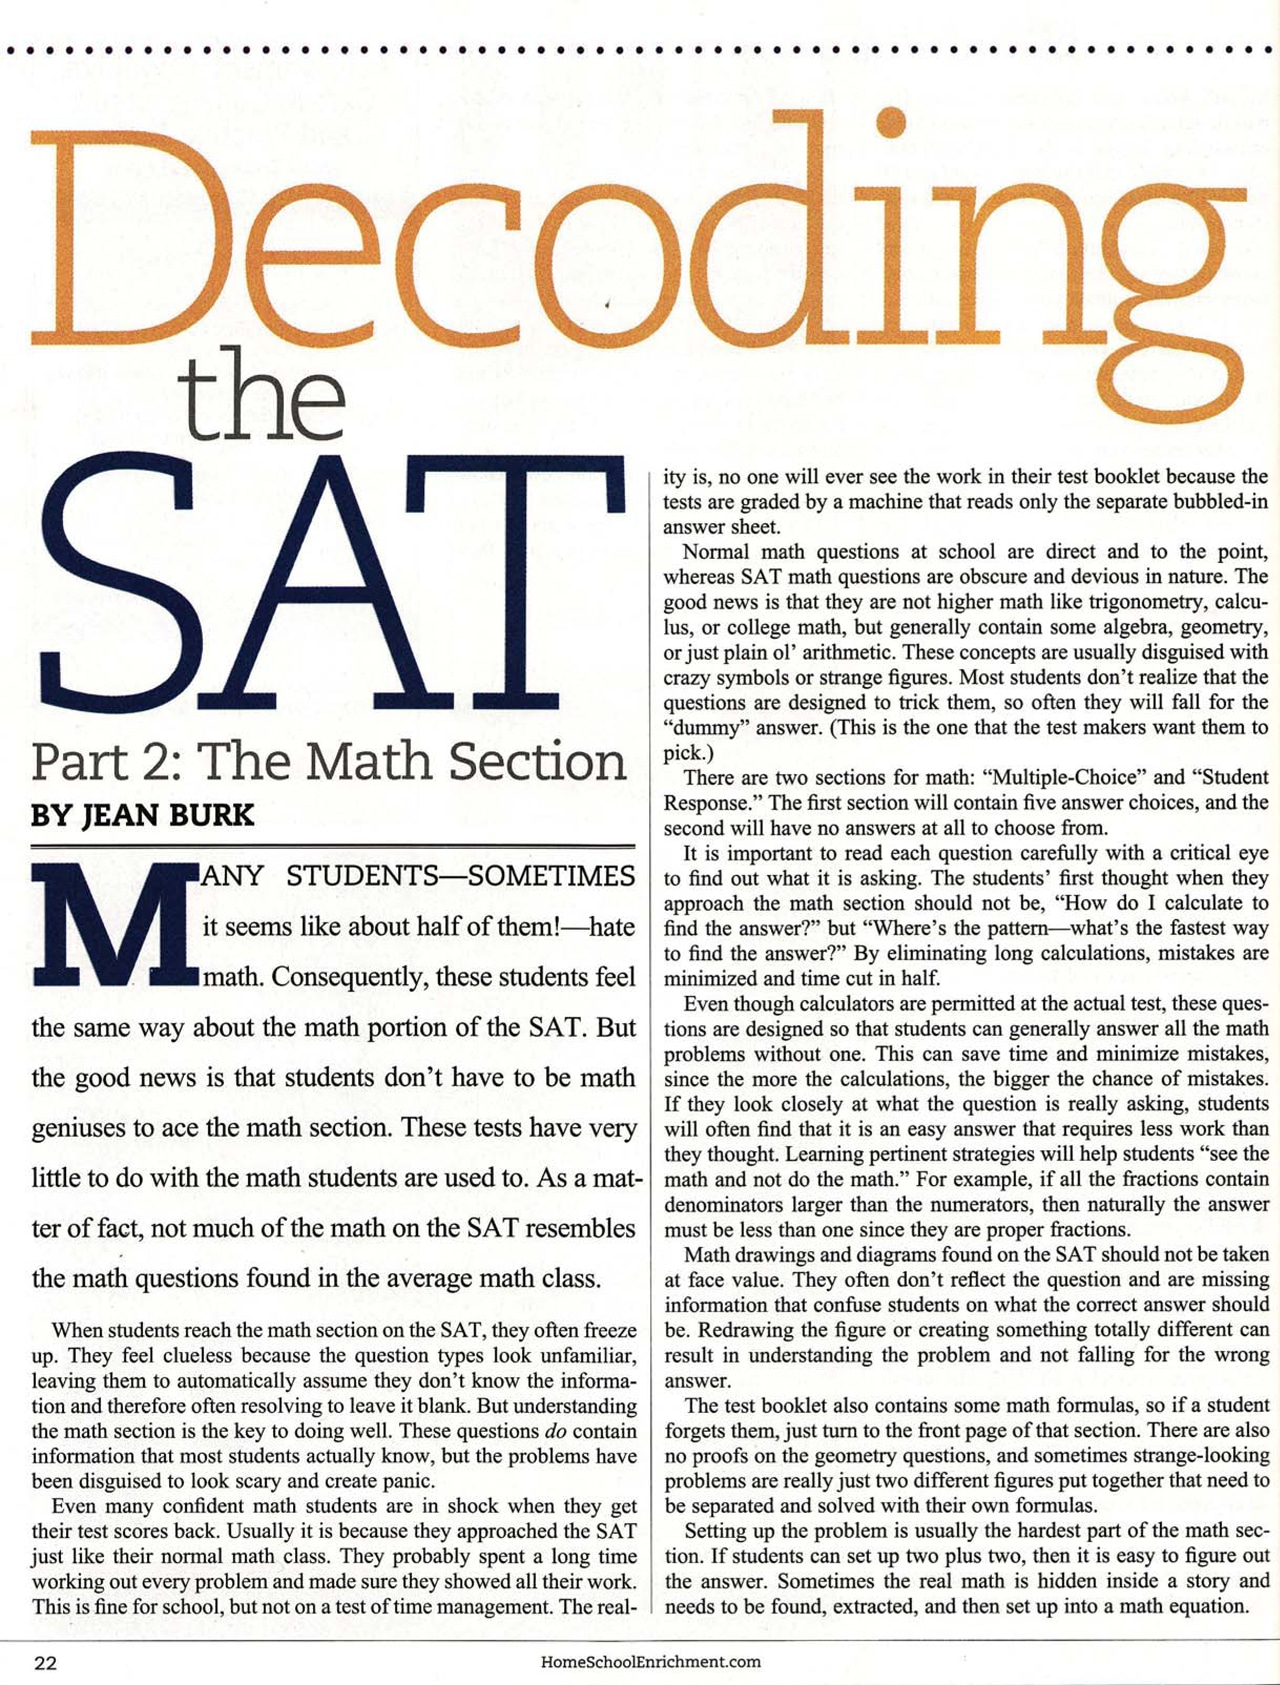 decoding-the-sat-page-1